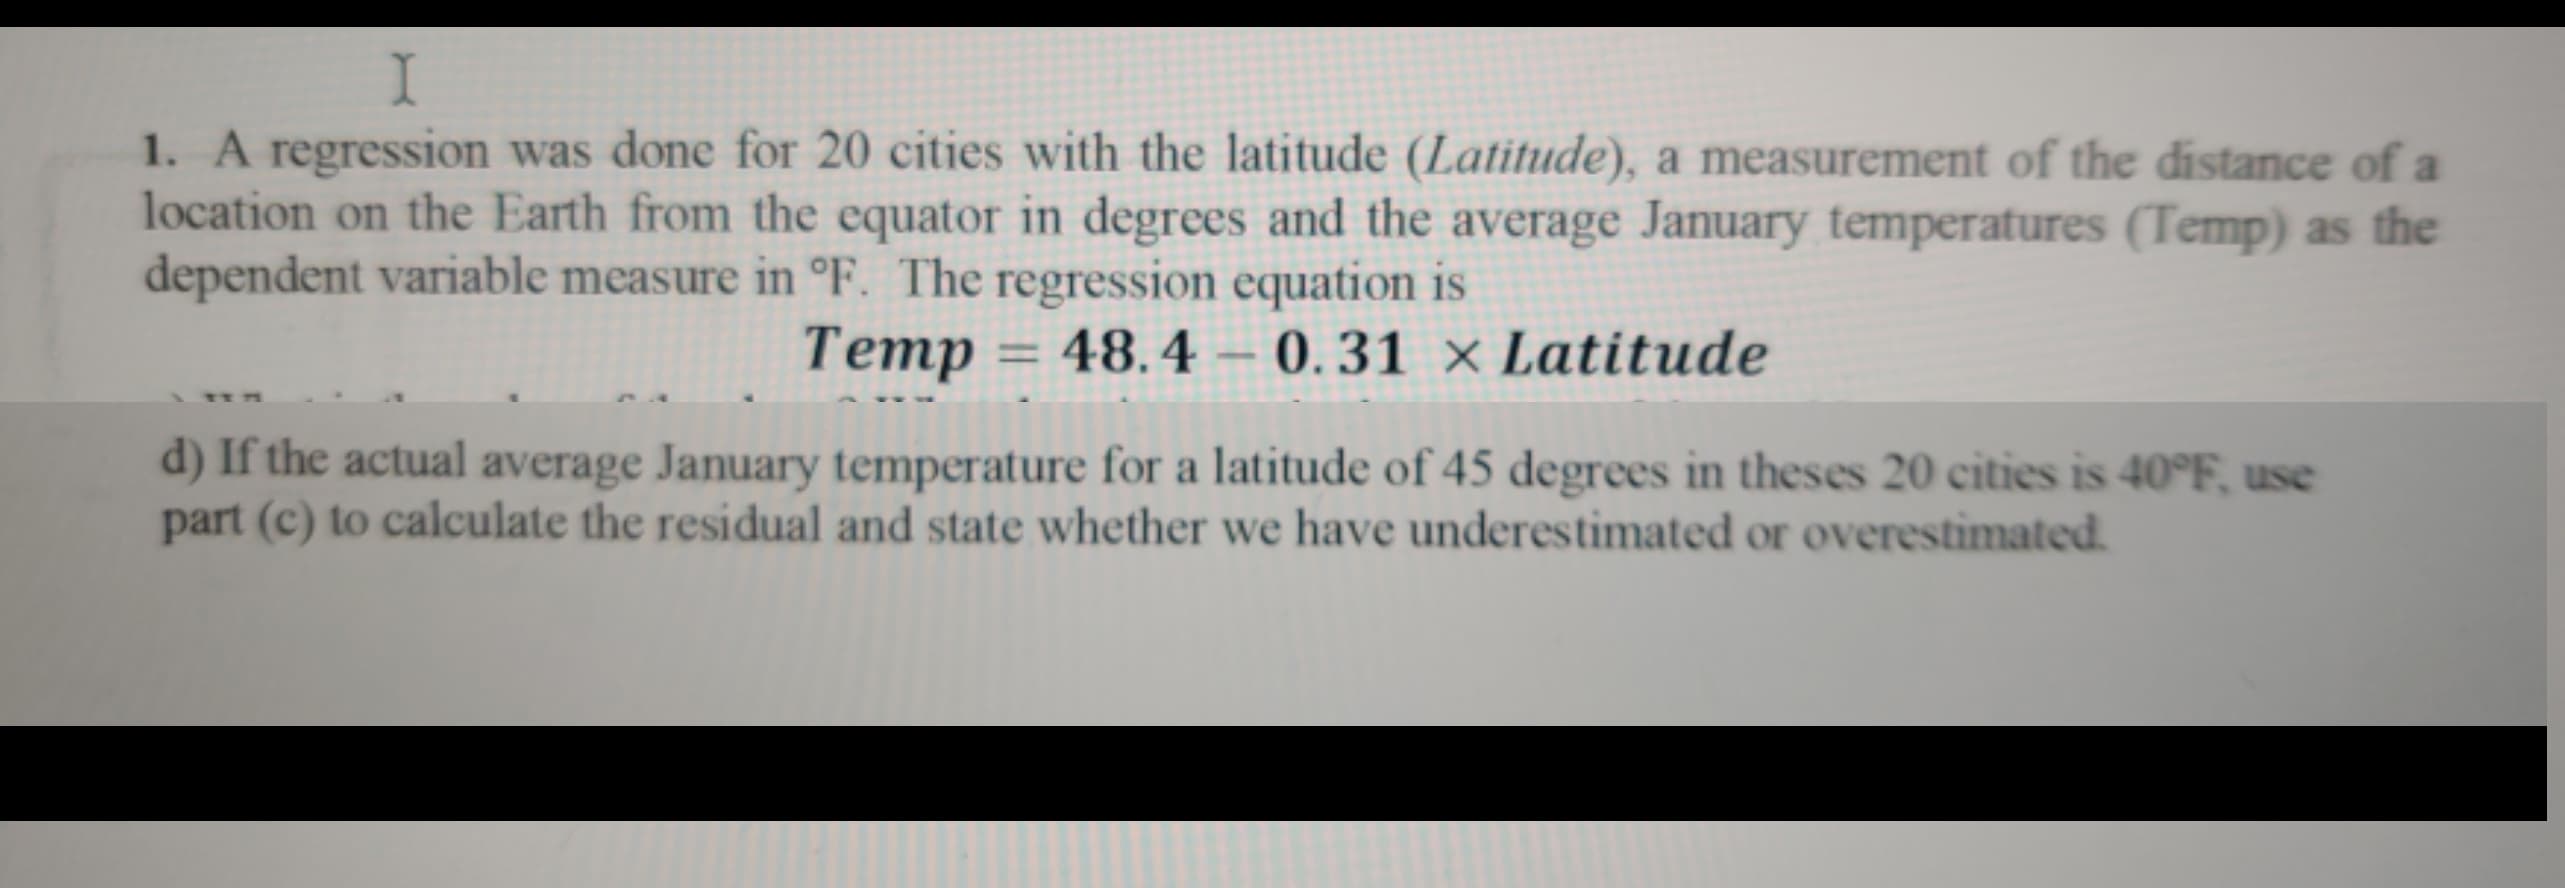 1. A regression was done for 20 cities with the latitude (Latitude), a measurement of the distance of a
location on the Earth from the equator in degrees and the average January temperatures (Temp) as the
dependent variable measure in °F. The regression equation is
Temp = 48.4 – 0.31 × Latitude
d) If the actual average January temperature for a latitude of 45 degrees in theses 20 cities is 40°F, use
part (c) to calculate the residual and state whether we have underestimated or overestimated.
